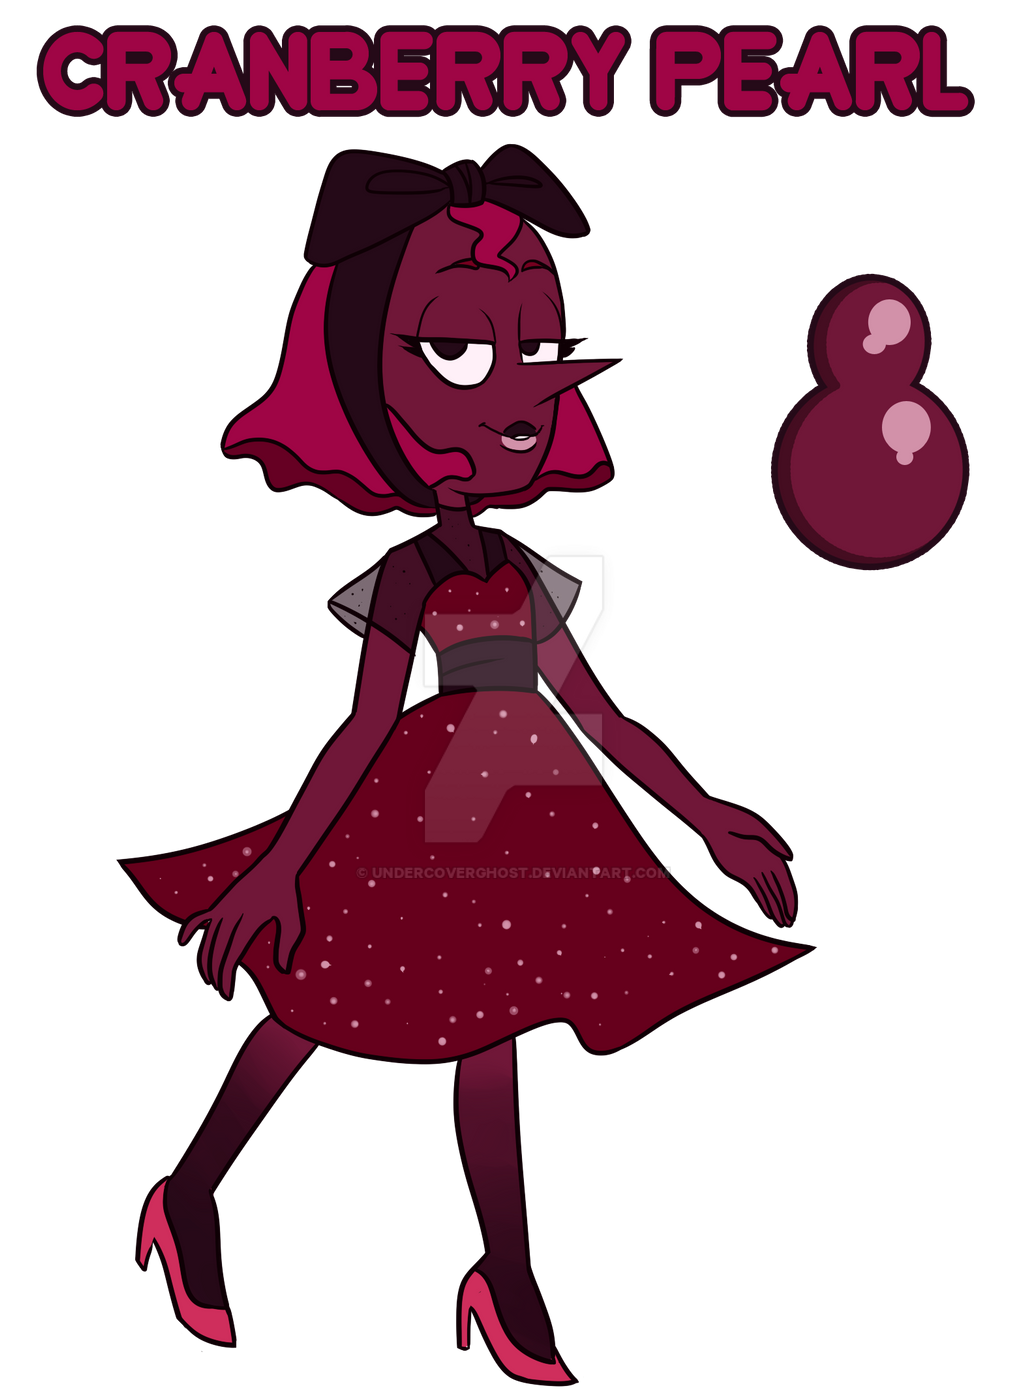 Cranberry Pearl